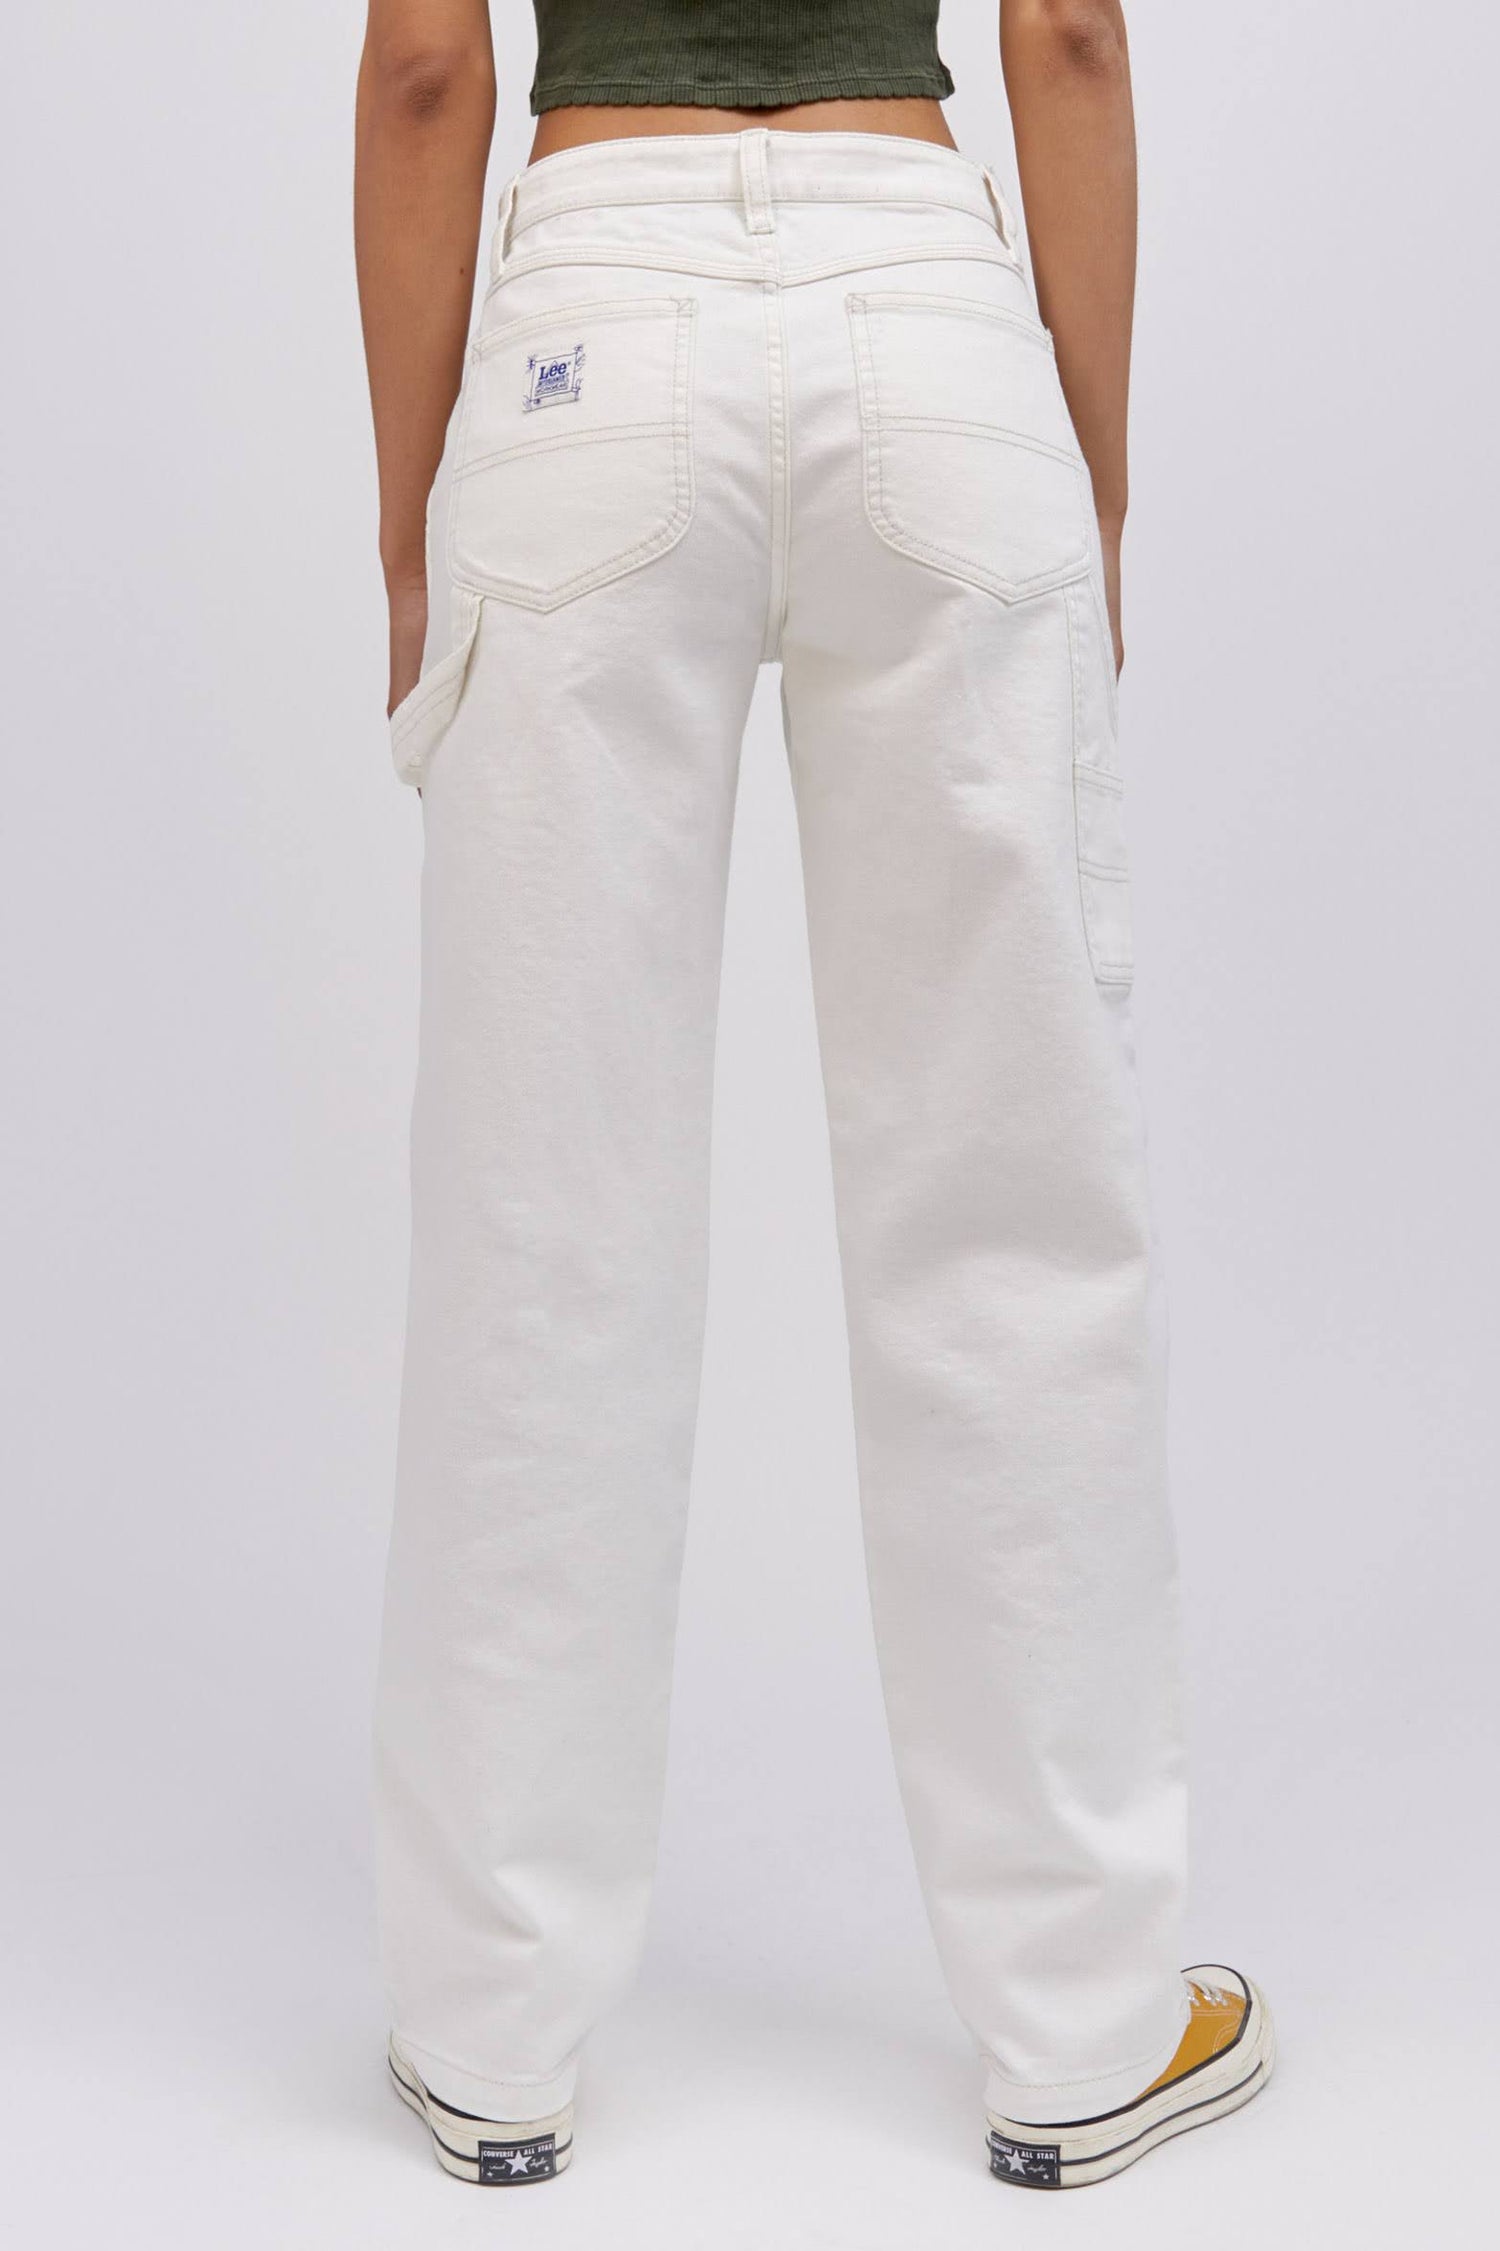 A  model featuring a white workwear pant made from heavy cotton, accented with key Lee detailing of triple-stitched seams, oversized pockets and a uniform like hammer loop.